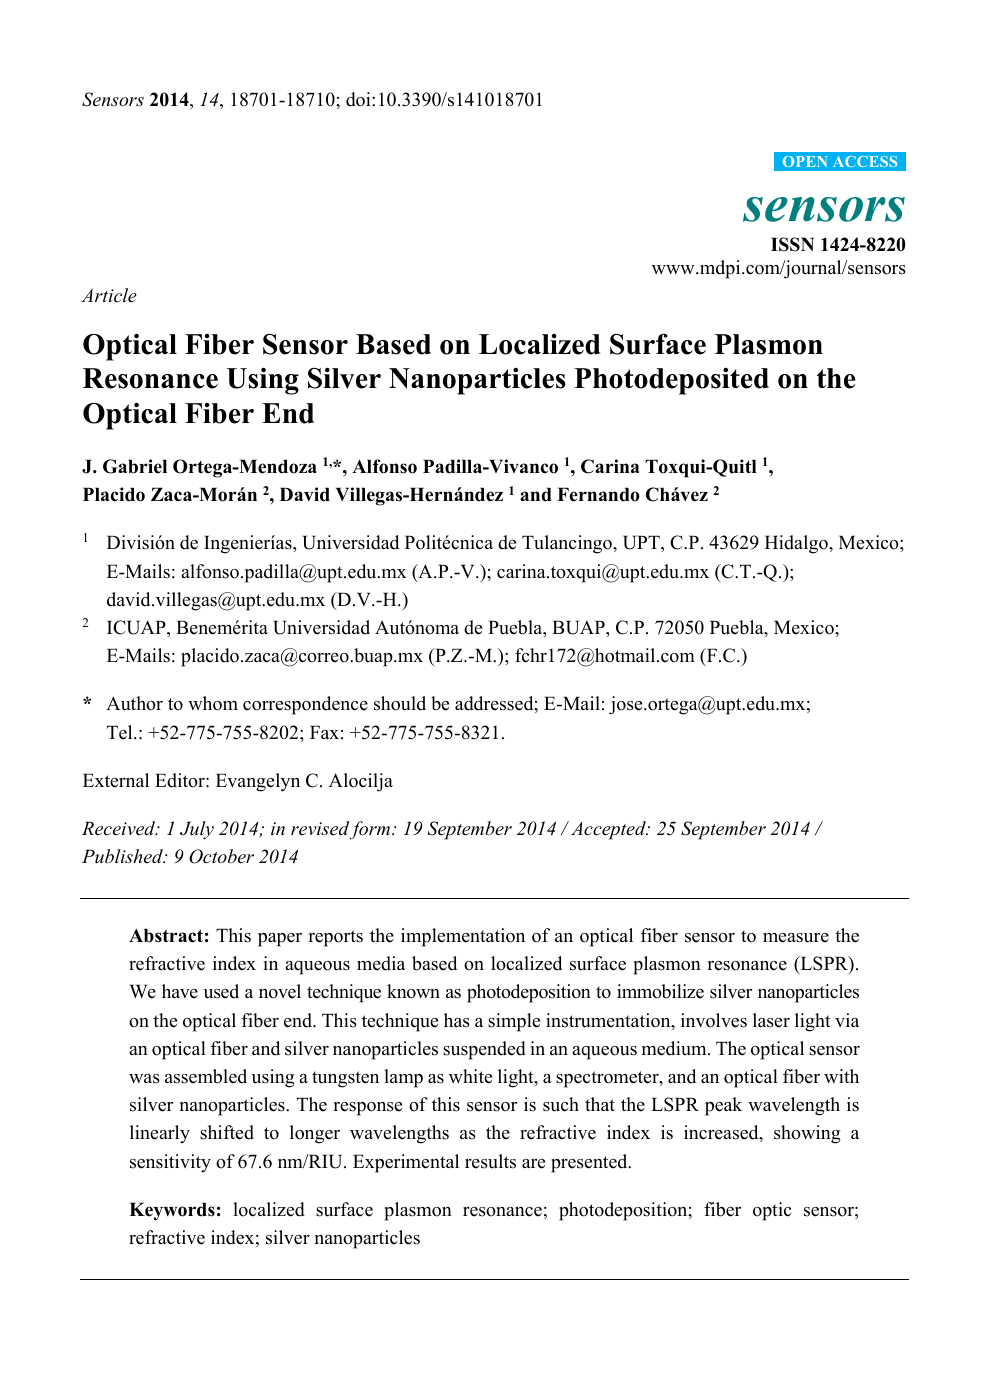 Optical Fiber Sensor Based On Localized Surface Plasmon Resonance Using Silver Nanoparticles Photodeposited On The Optical Fiber End Topic Of Research Paper In Nano Technology Download Scholarly Article Pdf And Read For